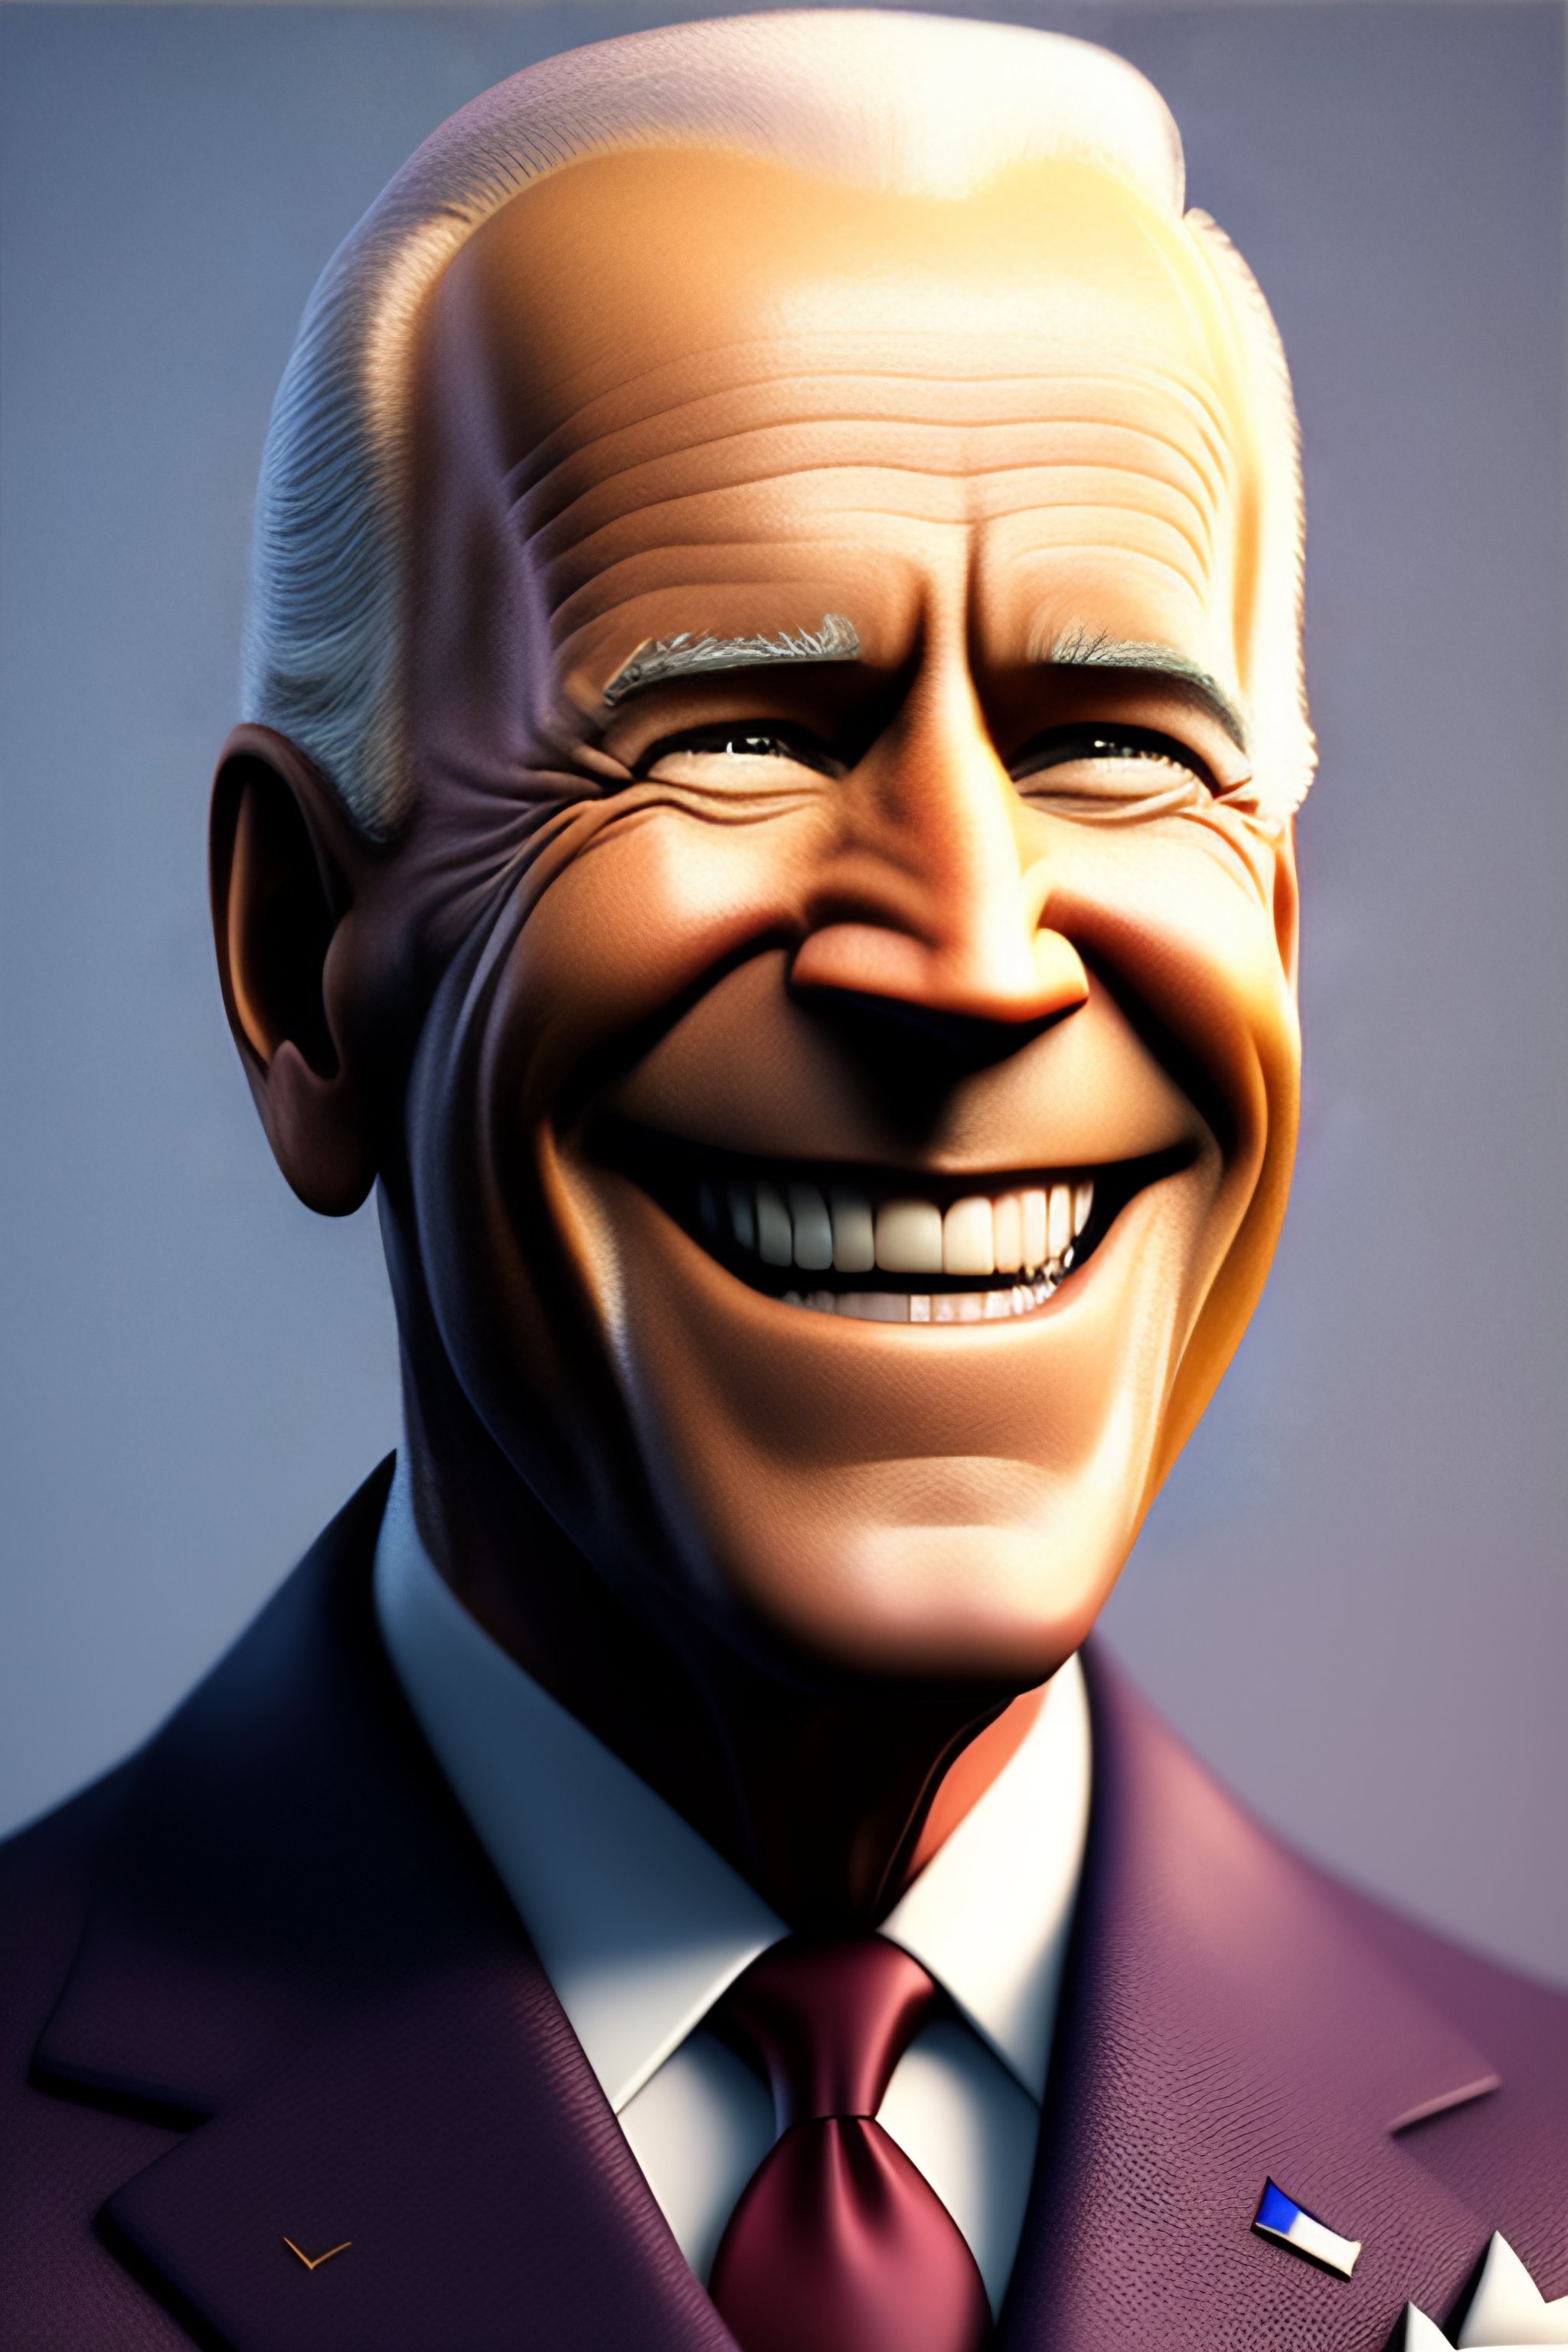 Lexica - Caricature 3D render of Joe Biden smiling, extremely ...